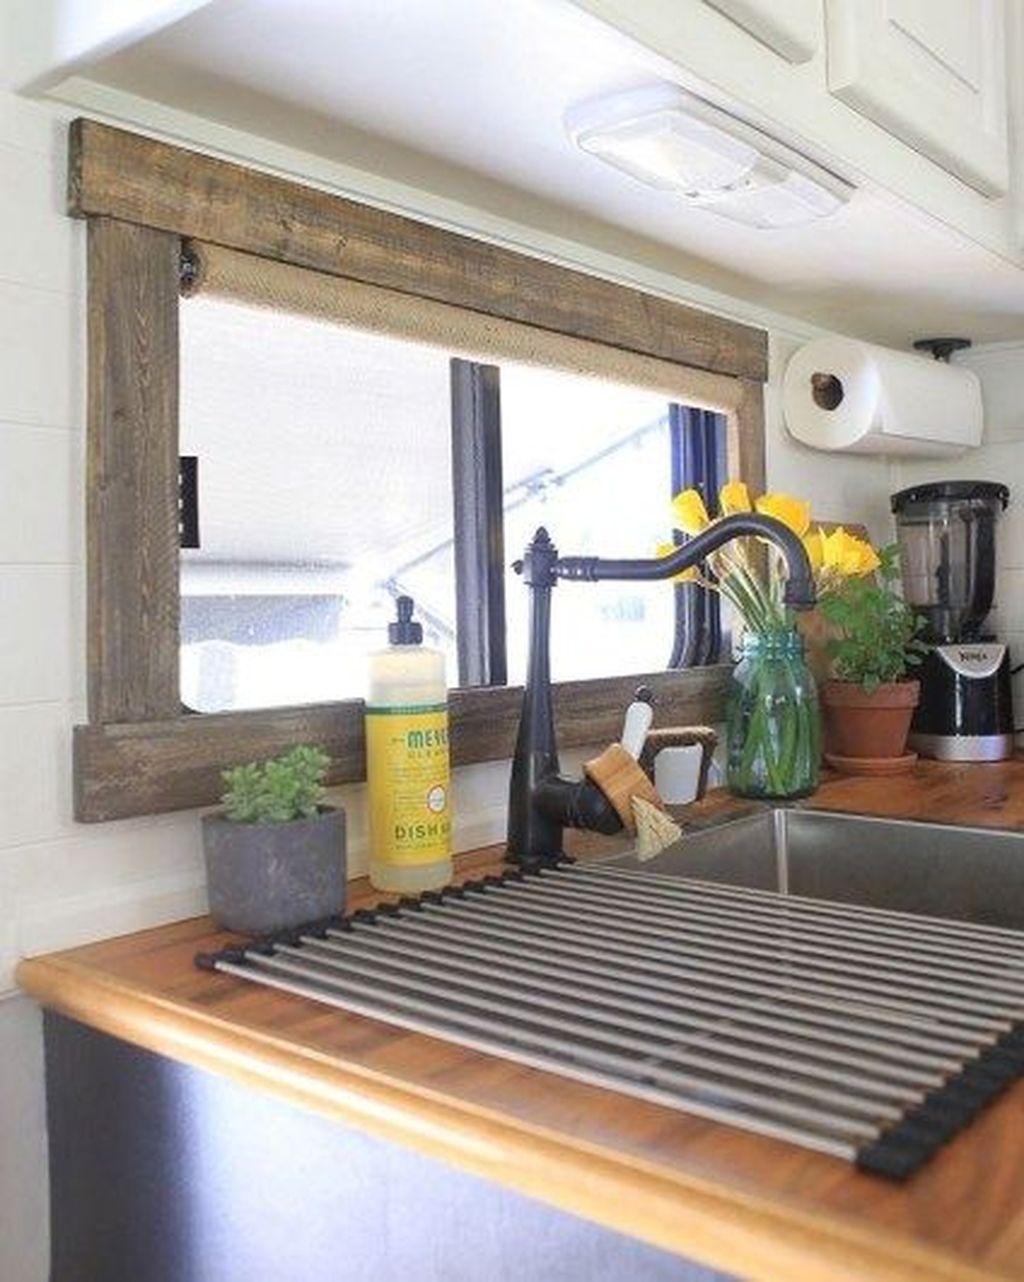 Best RV Kitchen Storage Ideas For Cozy Cook When The Camping 36